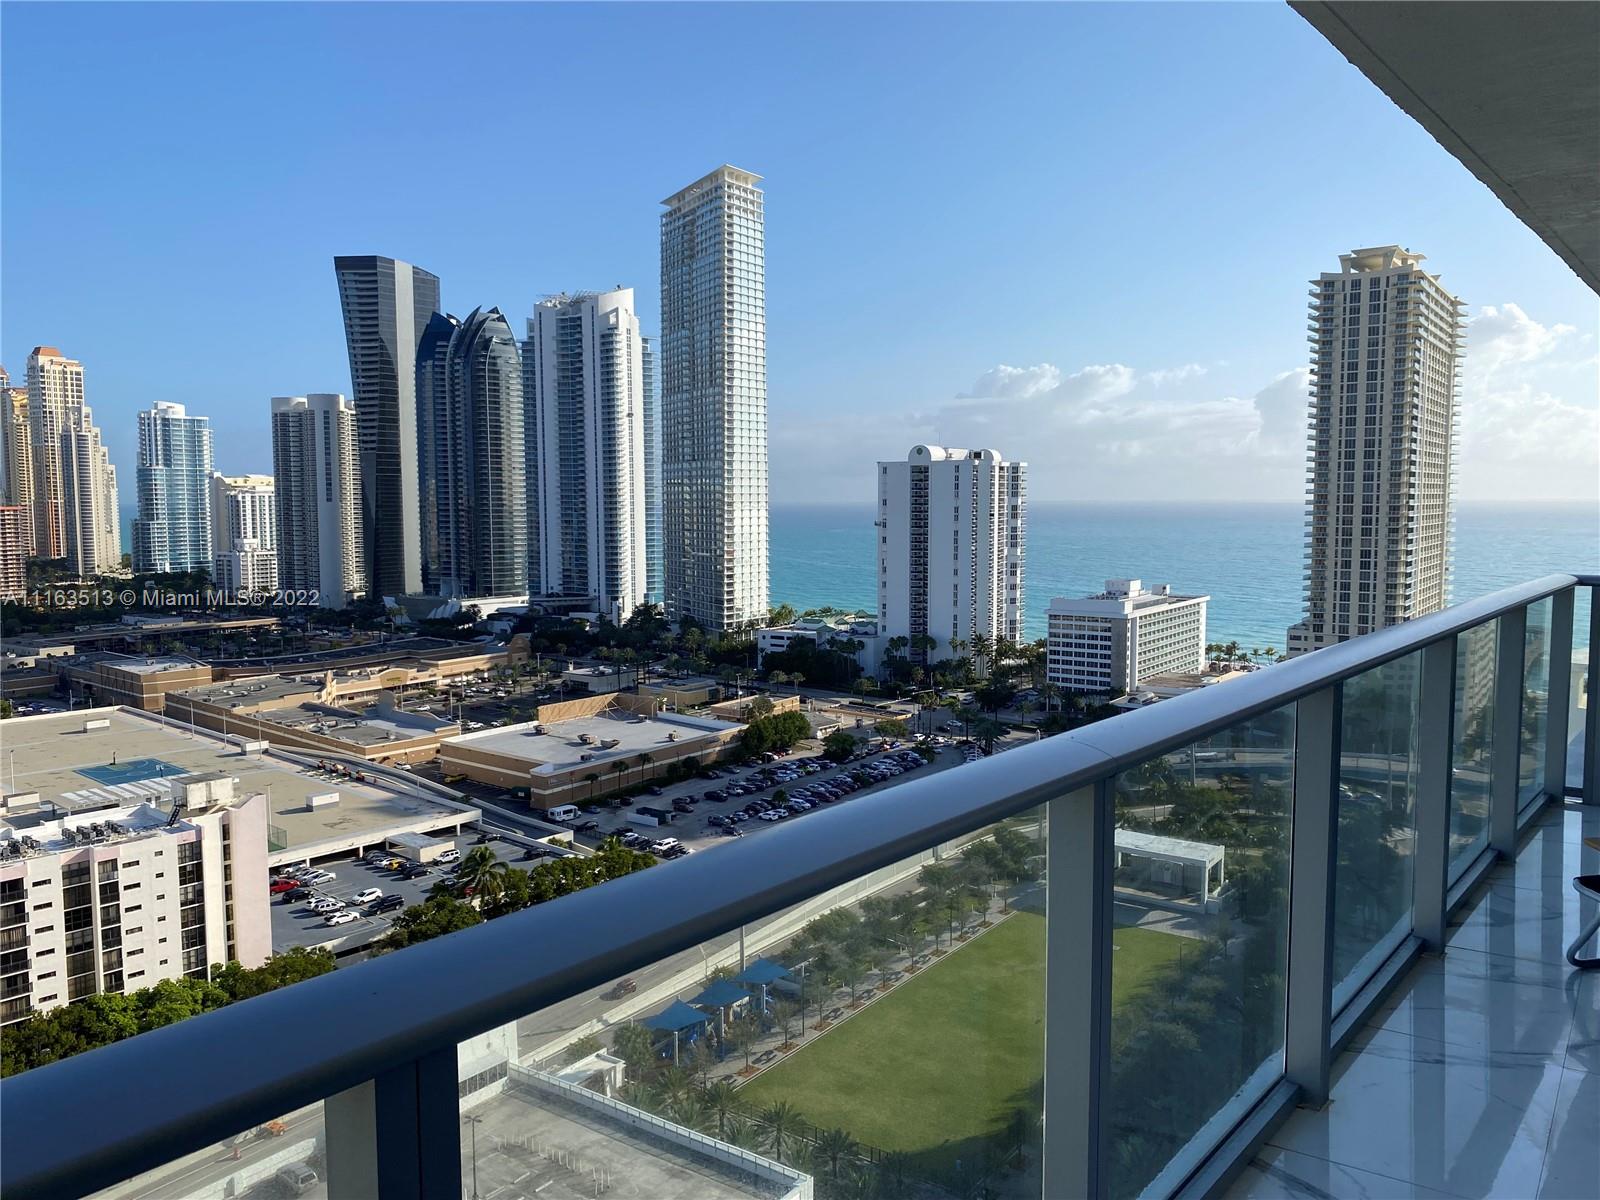 FULLY FURNISHED NICELY DECORATED 2 BEDROOM PLUS DEN 3 FULL BATHS IN THE HEART OF SUNNY ISLES BEACH WITH BREATHTAKING VIEWS OF THE OCEAN, CITY AND INTRACOASTAL WALKING DISTANCE TO THE BEACH, RESTAURANTS, SHOPPING.  FULL AMENITIES BUILDING CONCIERGE, VALET PARKING, SECURITY. APARTMENT COMES WITH 1 ASSIGNED AND 1 VALET PARKING SPACES.